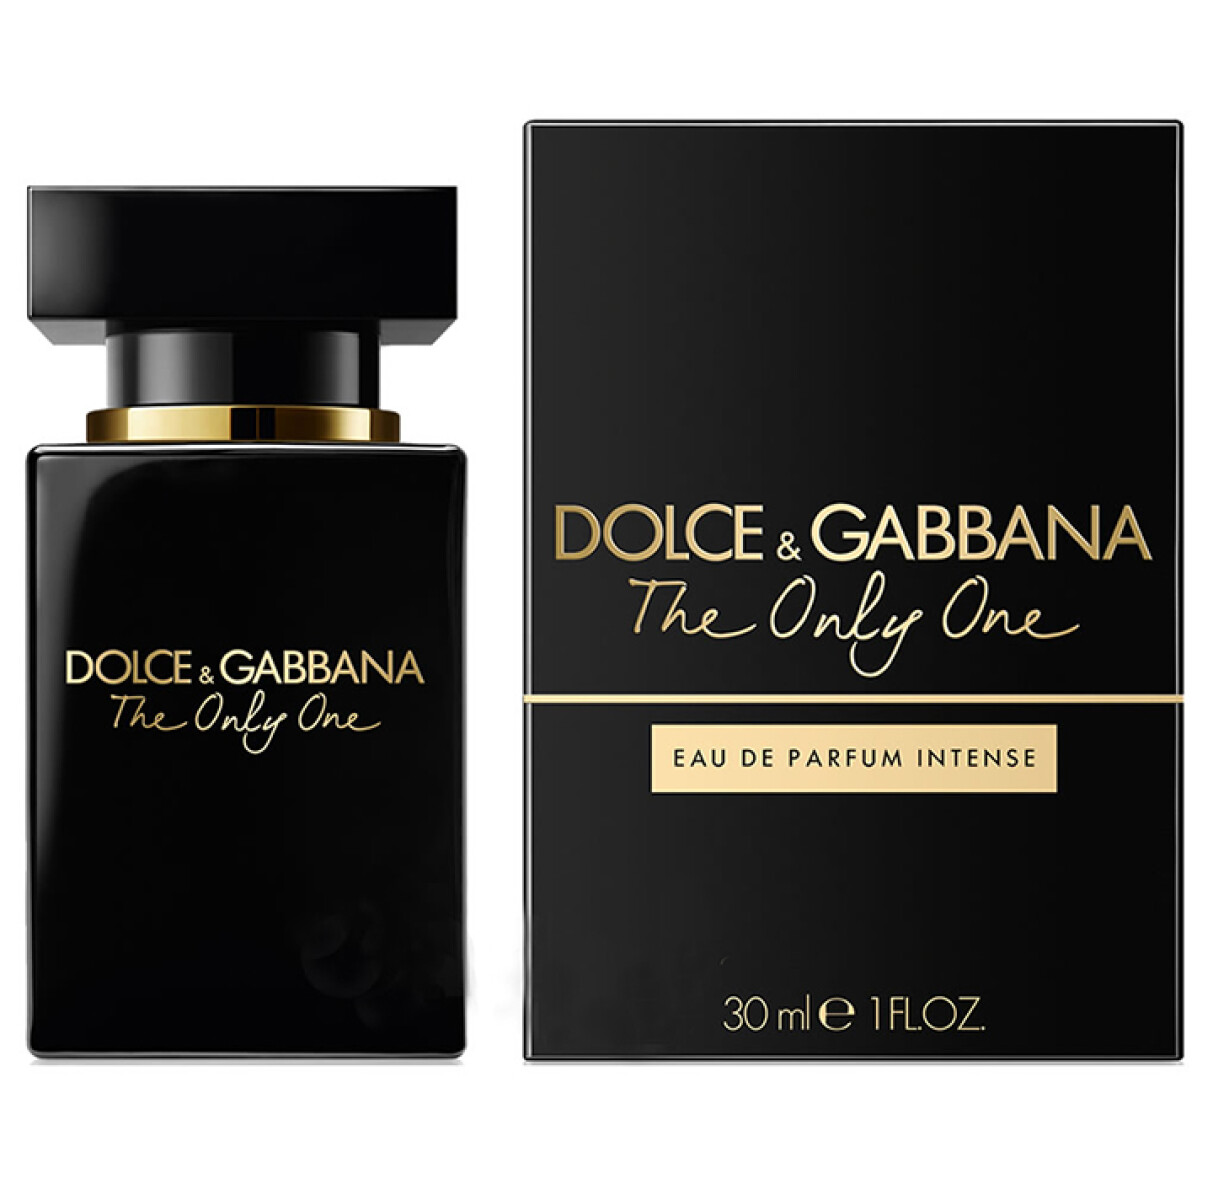 Dolce & Gabbana The Only One edp intense 30 ml 